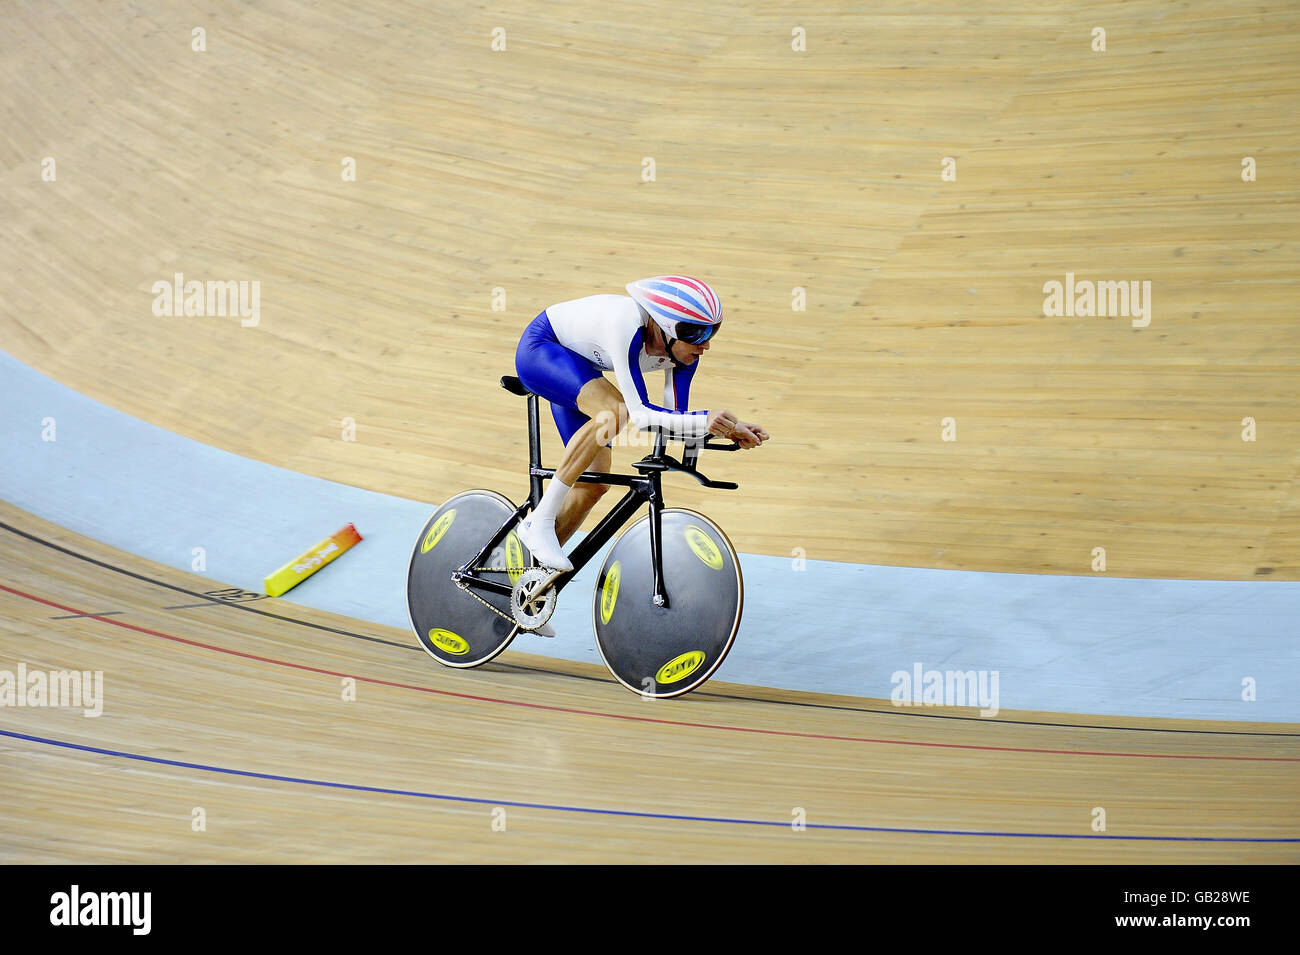 Great Britain's Bradley Wiggins during his heat in the Men's Individual Pursuit at the Laoshan Velodrome during the 2008 Beijing Olympic Games in China. Stock Photo